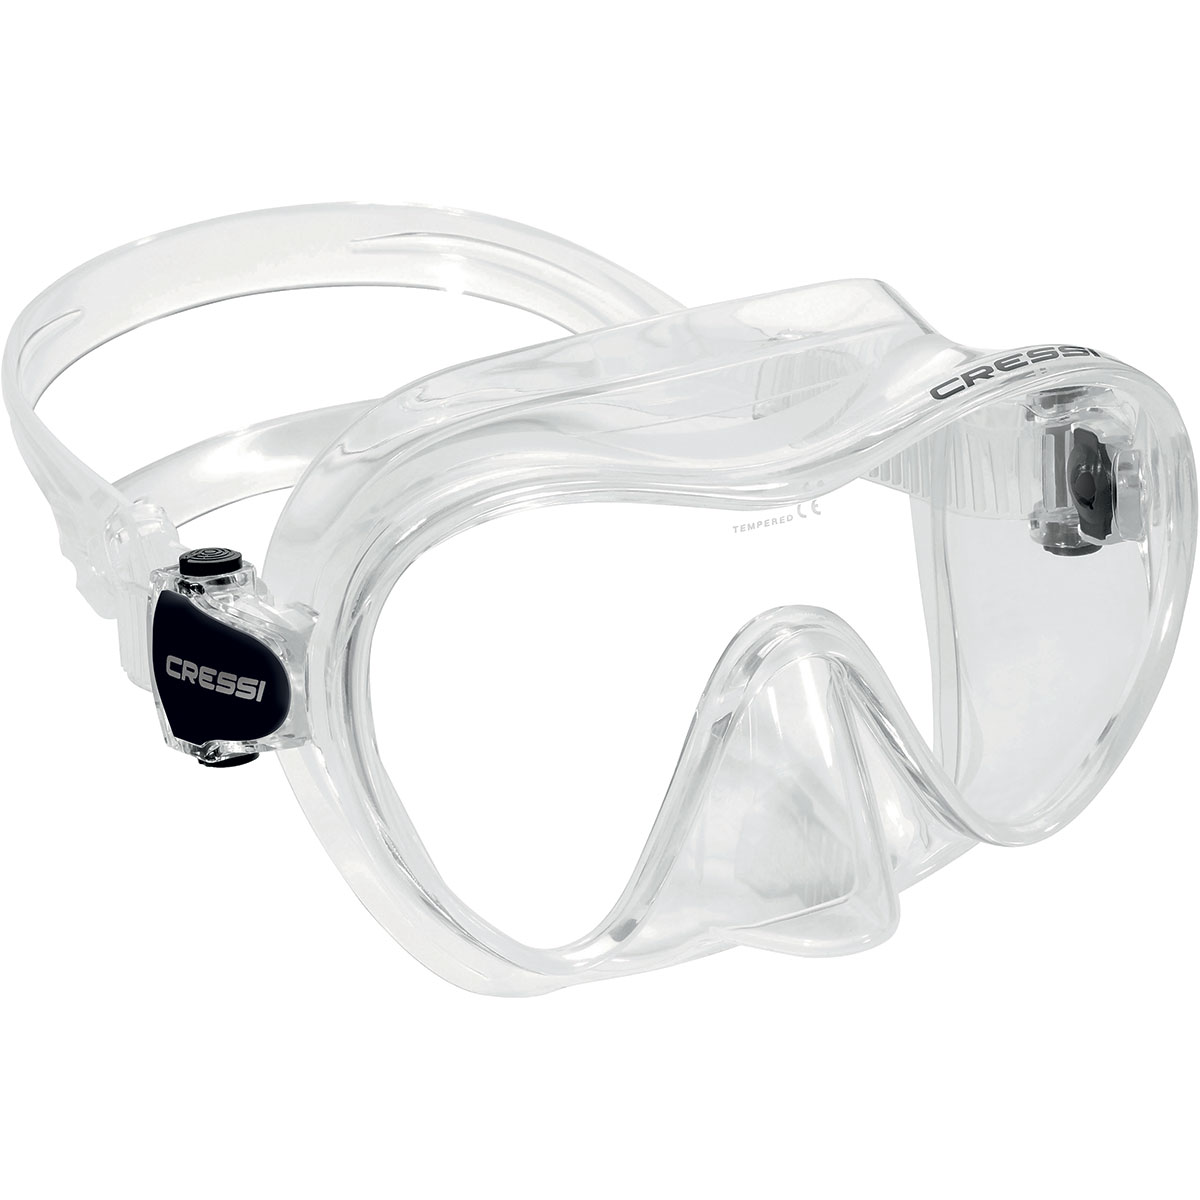 The best snorkel mask overall